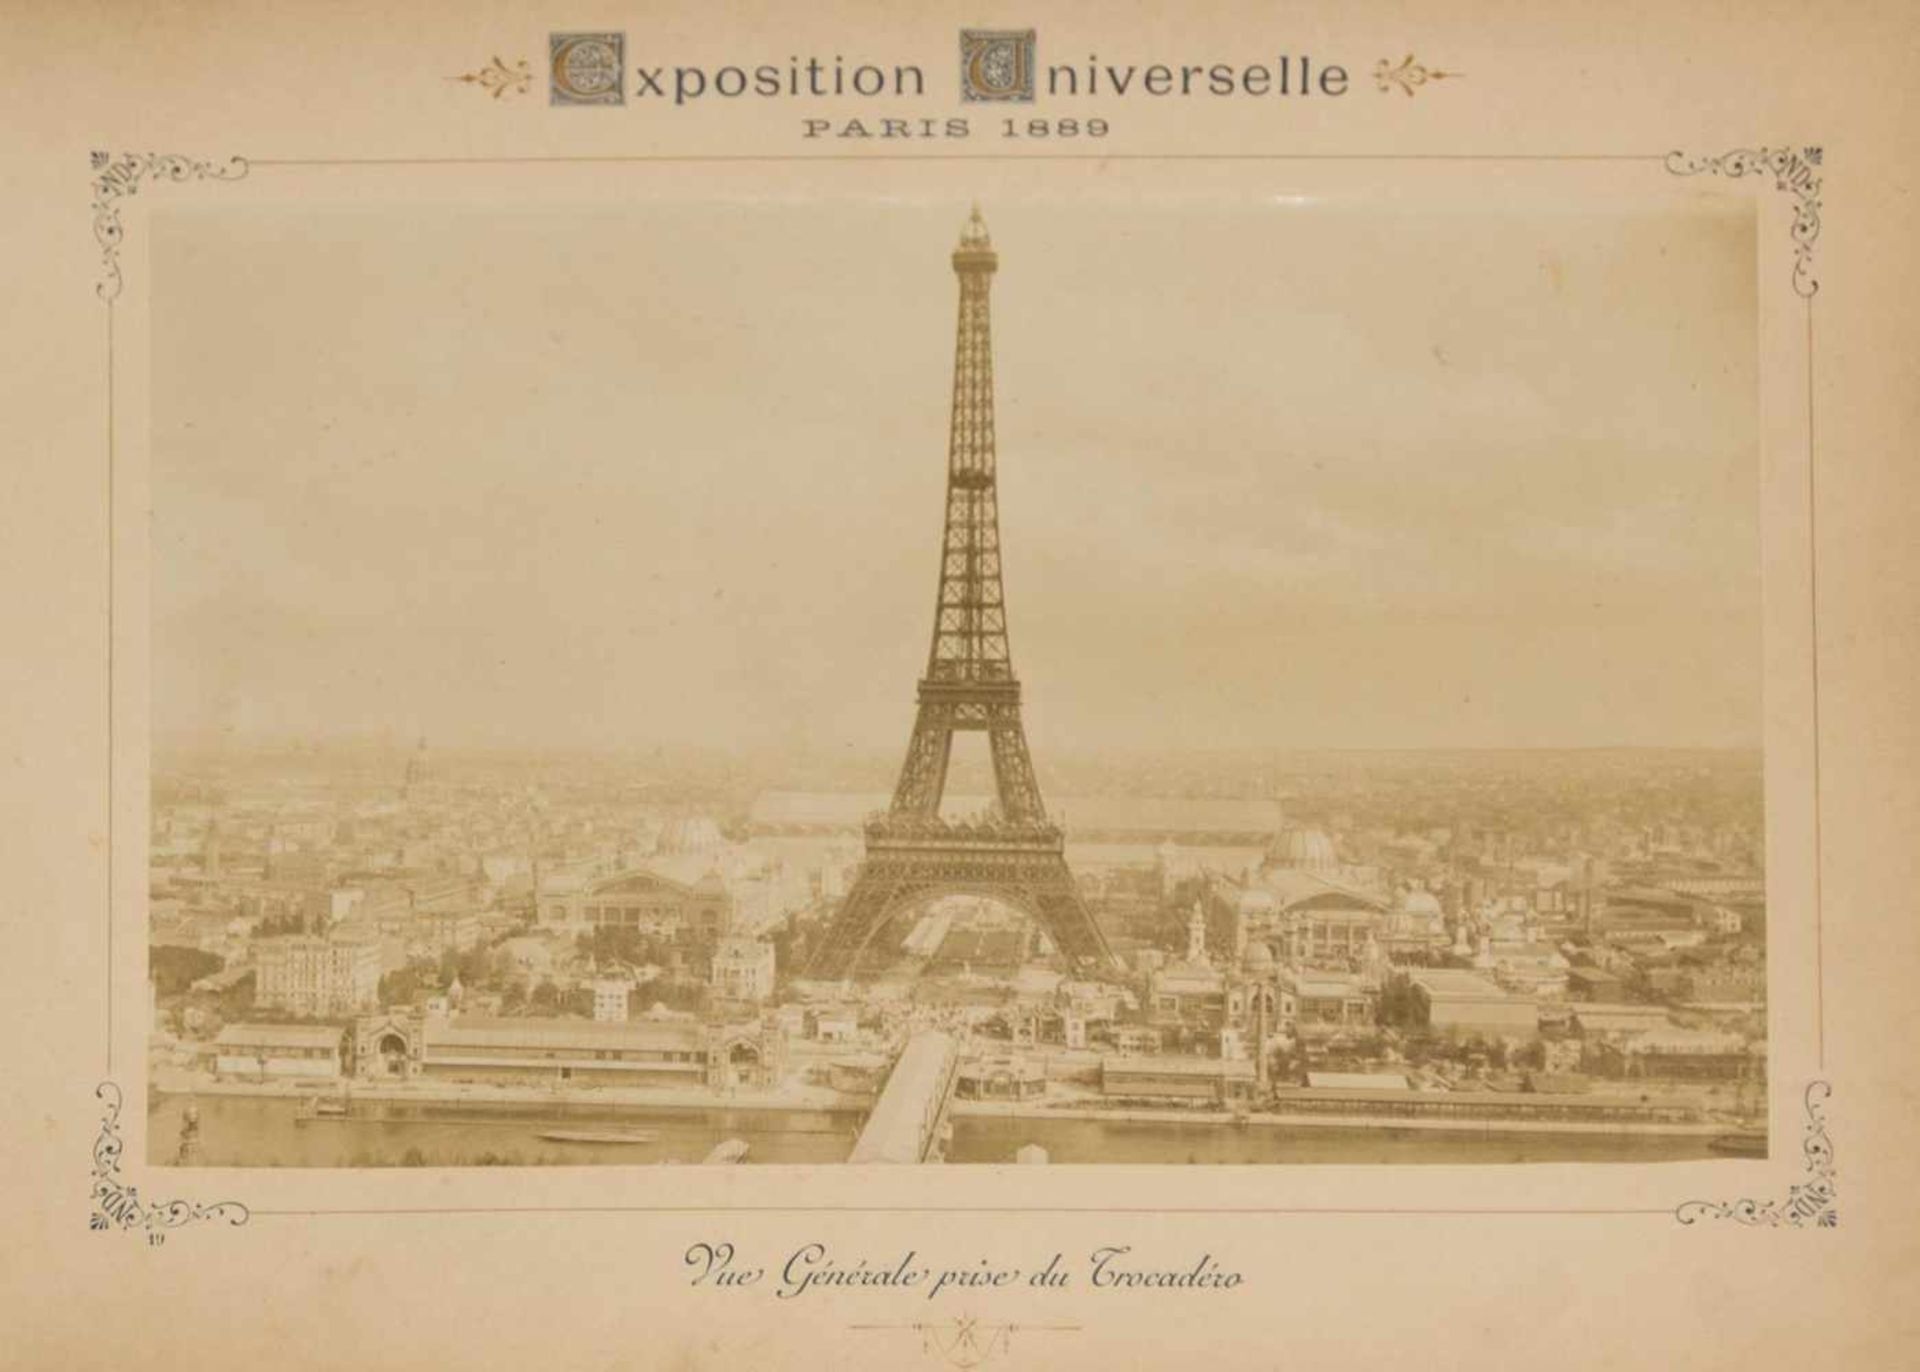 Exposition Universelle. 1889. Paris. 27x18,5 cm. France. In the composite cover with gold lettering. - Bild 8 aus 9